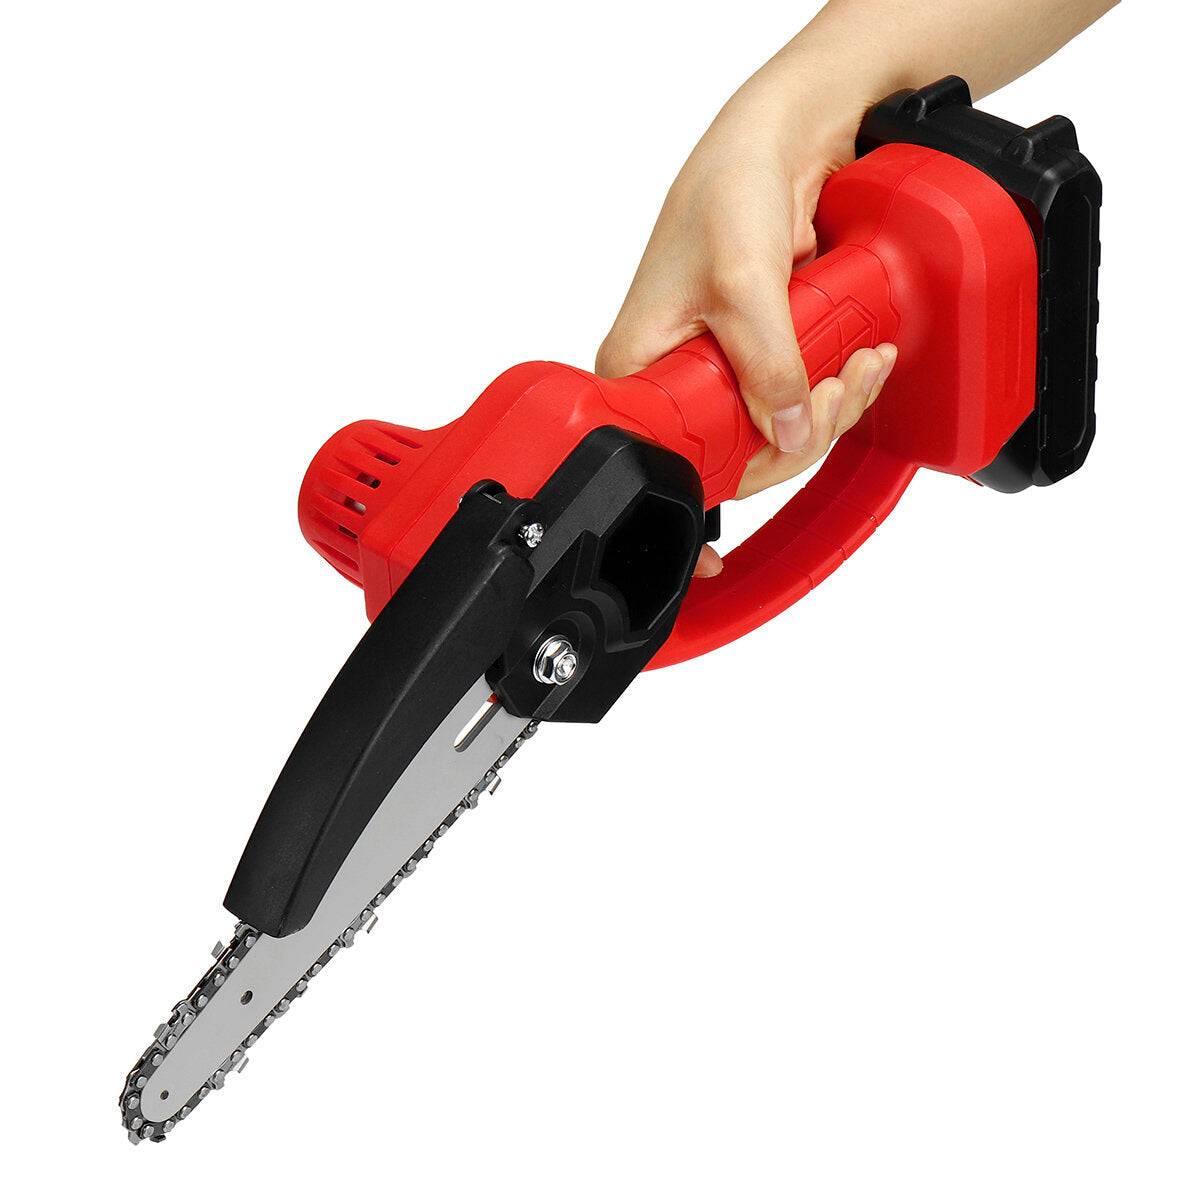 Handheld Mini Rechargable Chainsaw 6" Electric Chain Saws Stepless Speed Change Wood Work Cutter